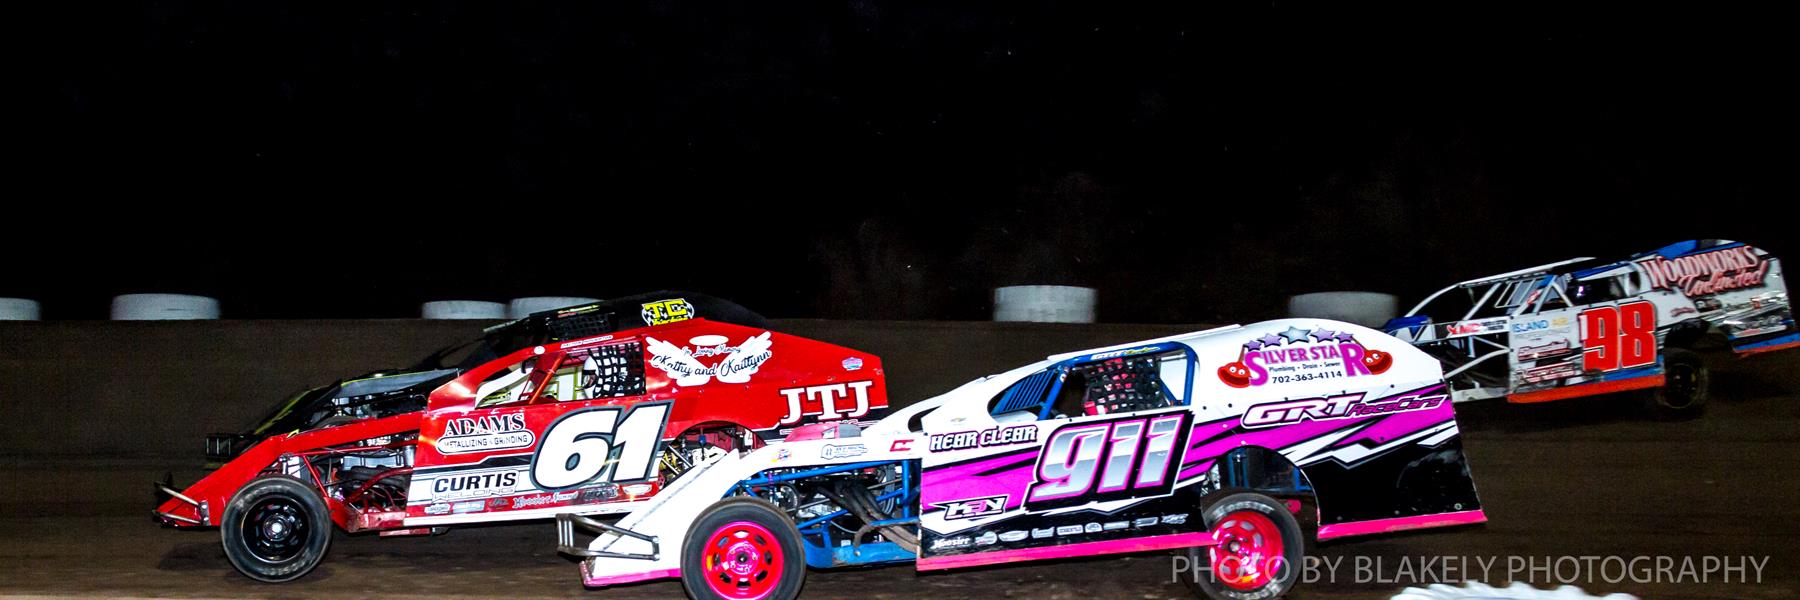 5/22/2021 - Mohave Valley Raceway